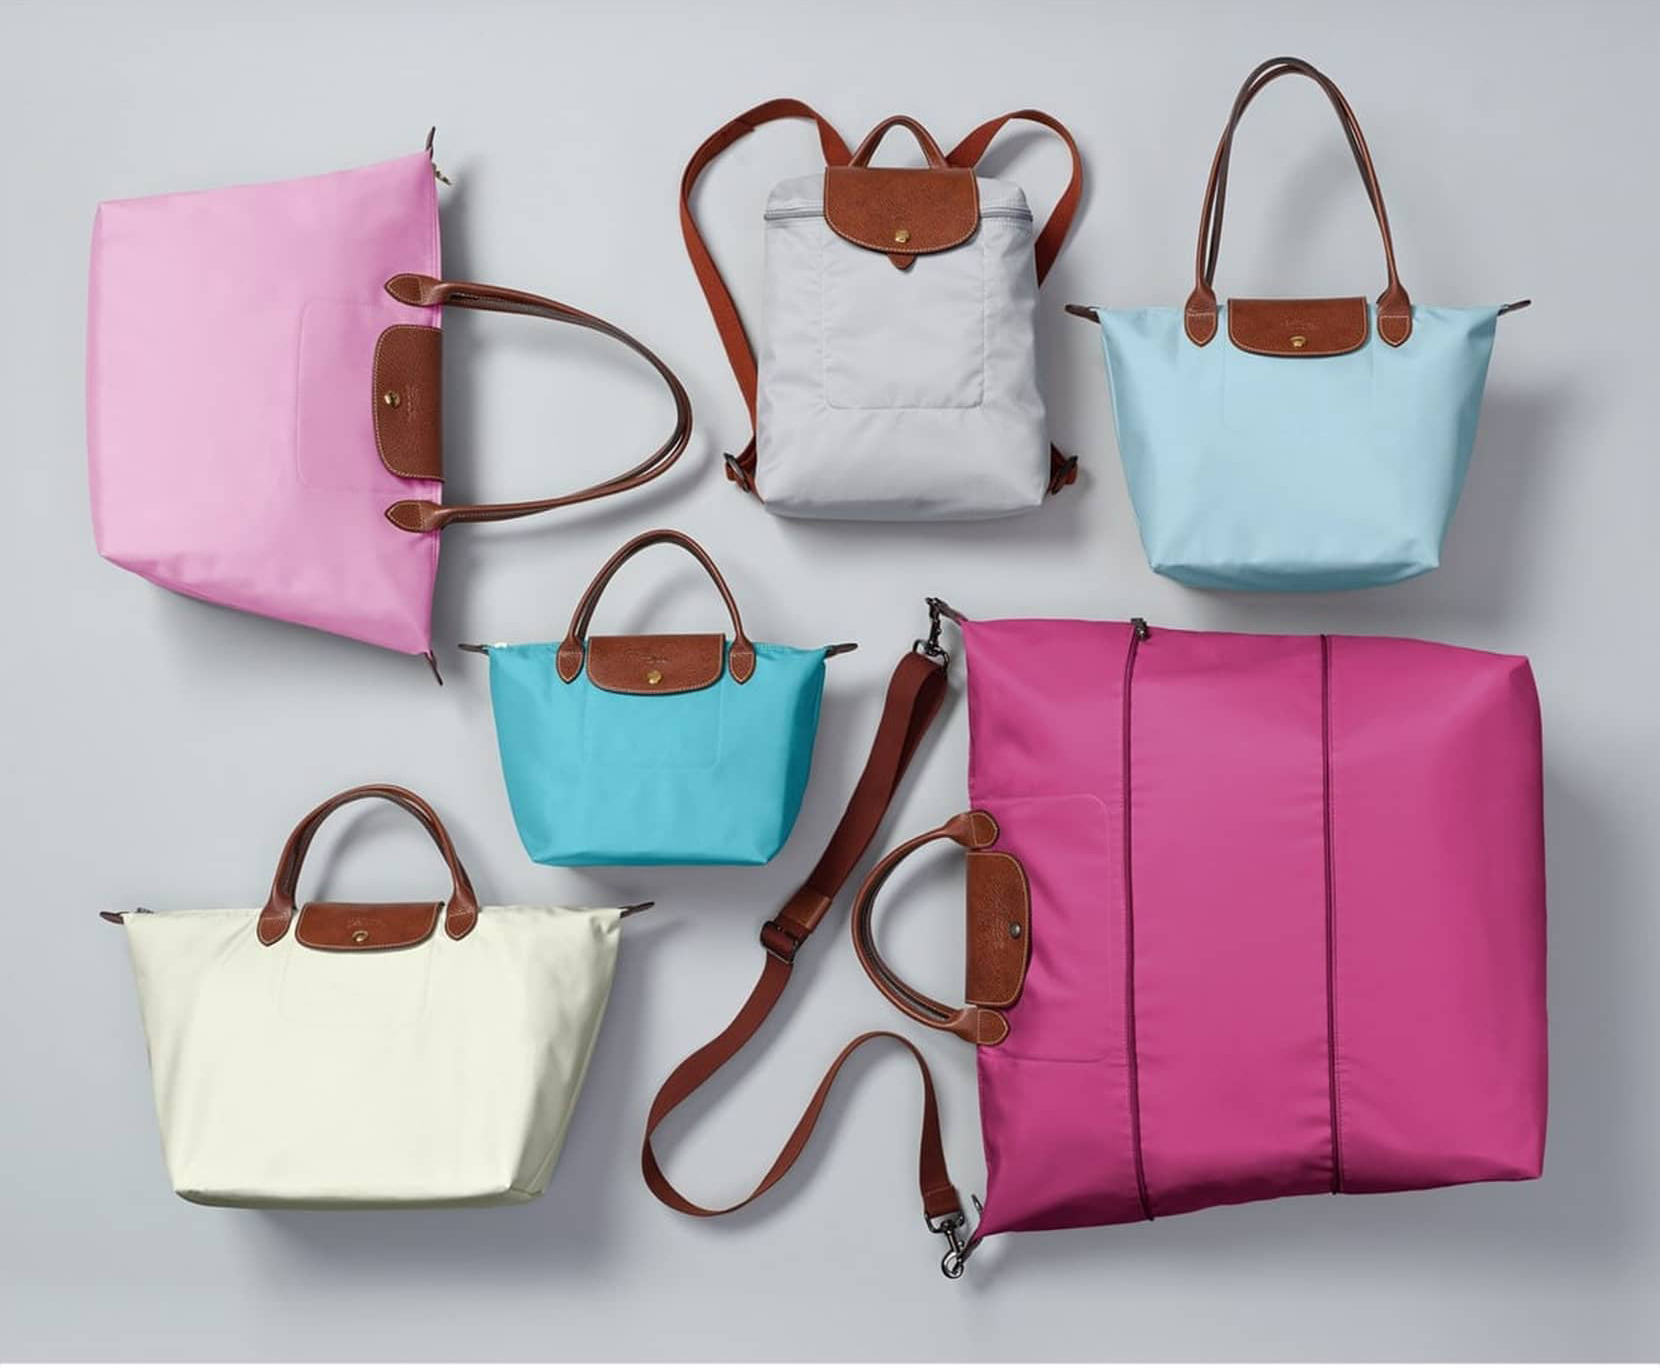 Longchamp Pouch Tote Bags